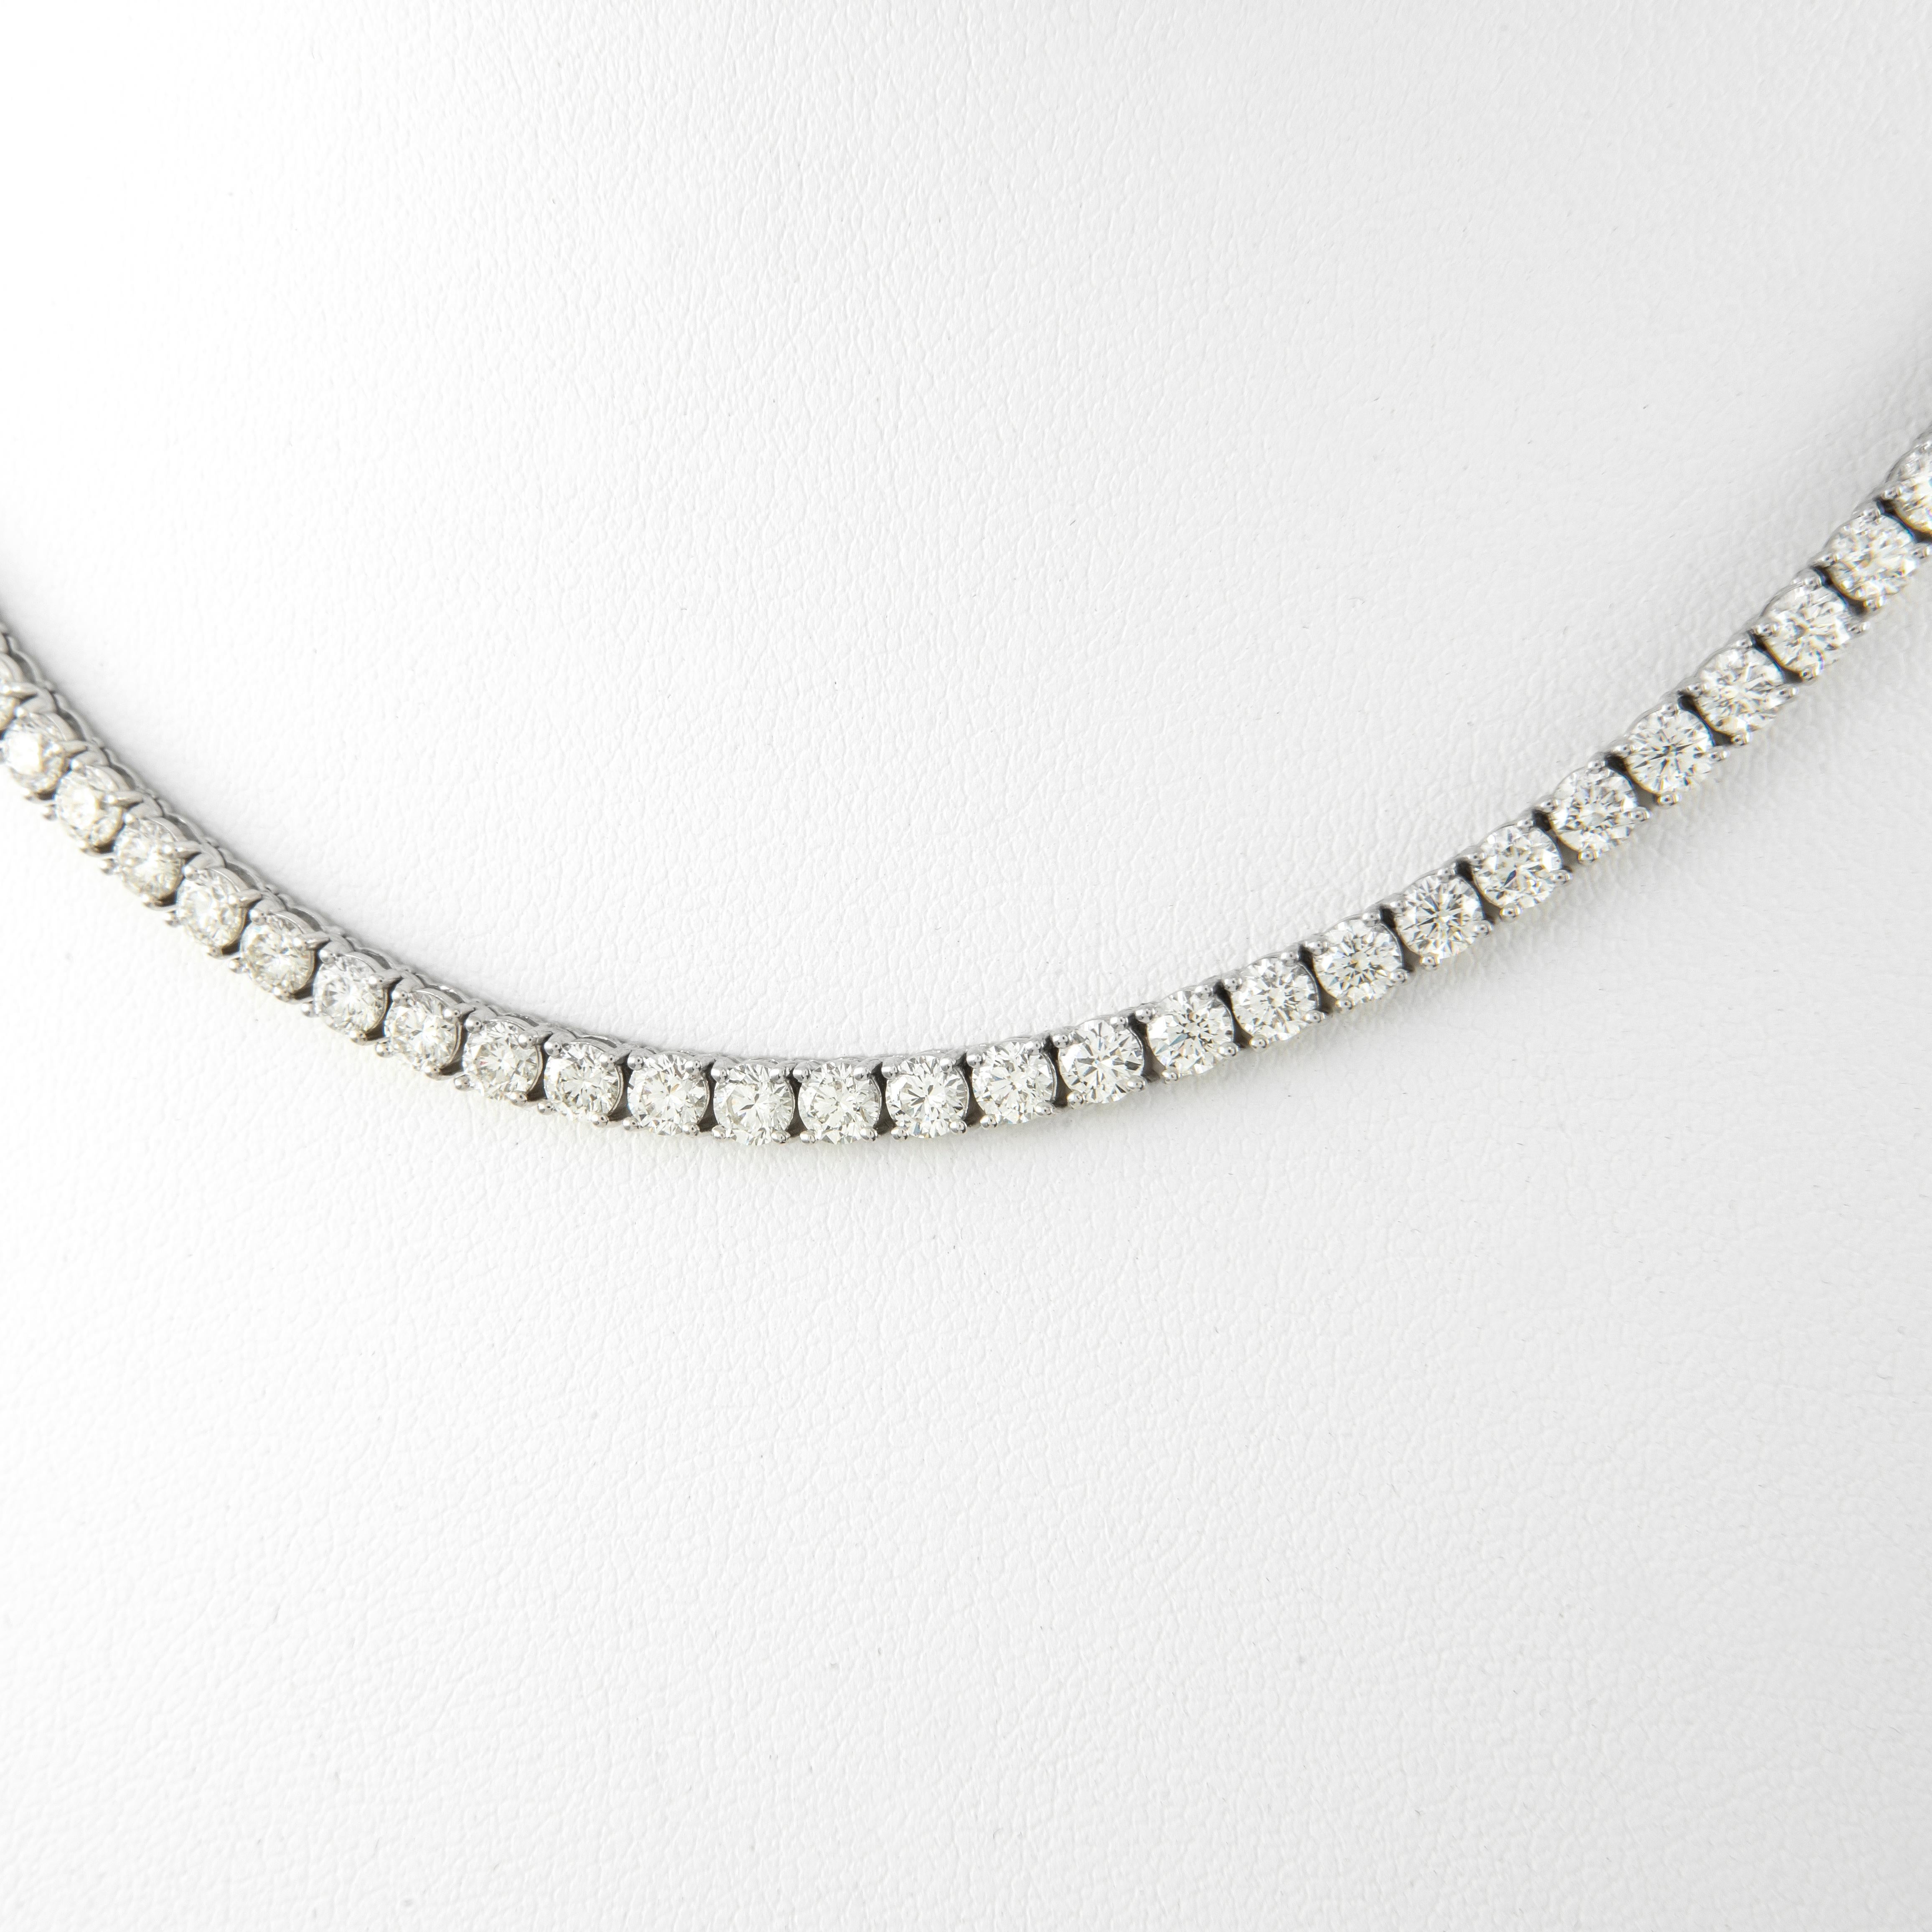 Contemporary Alexander Beverly Hills 16.90 Carat Diamond Tennis Necklace 18k White Gold For Sale